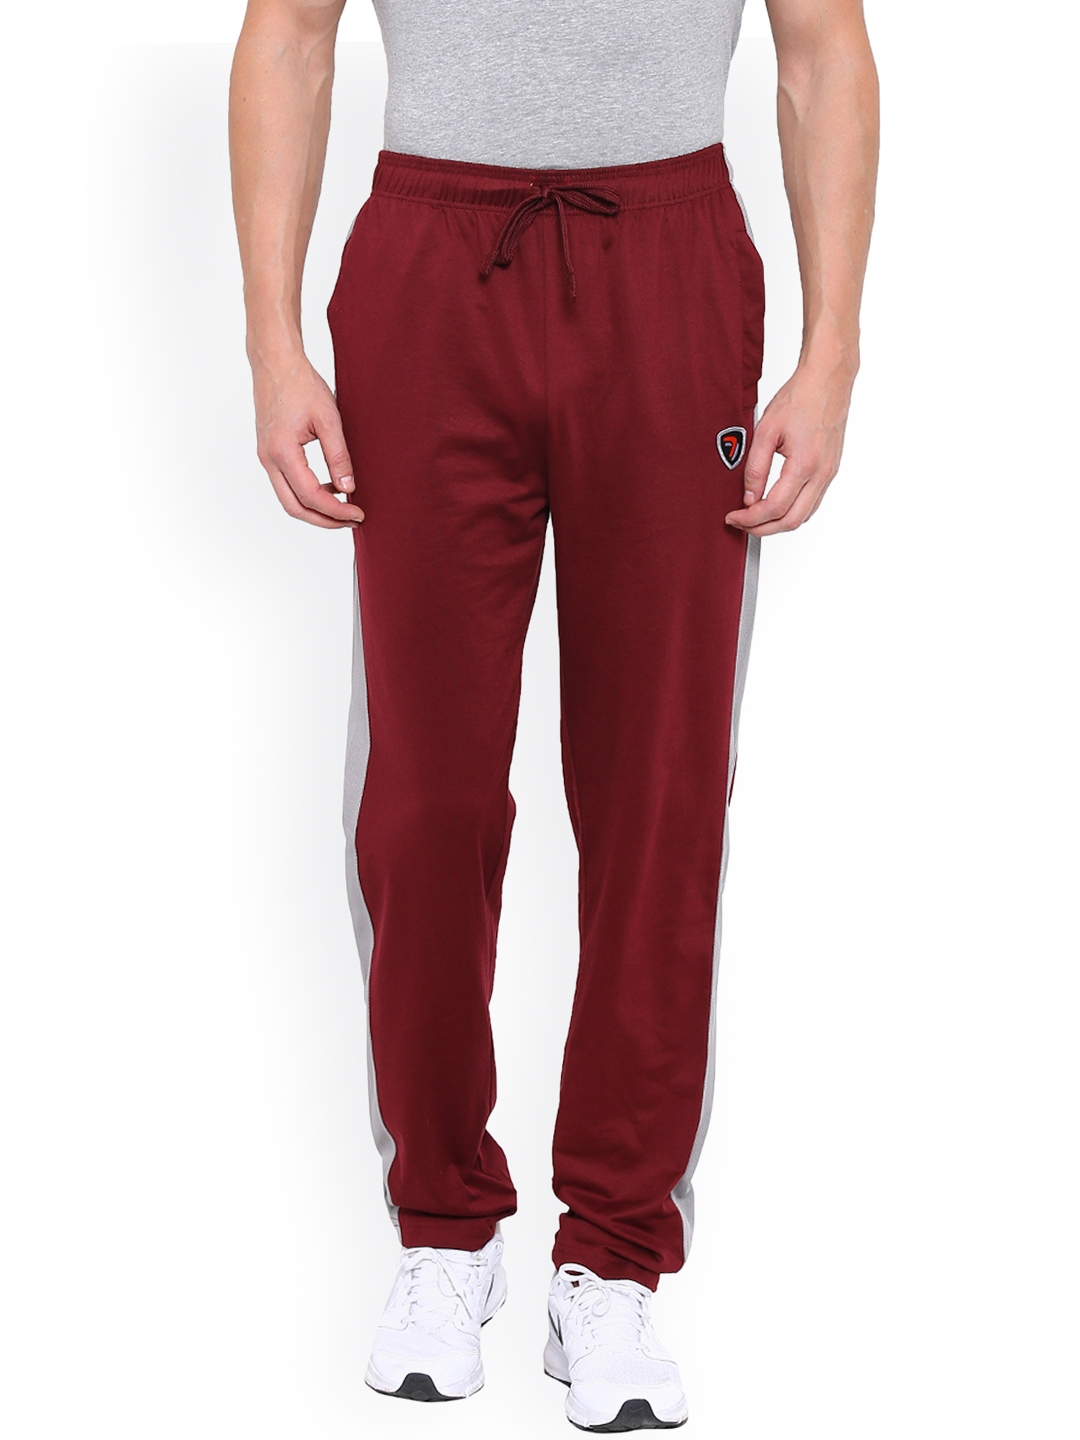 sporto red track suit